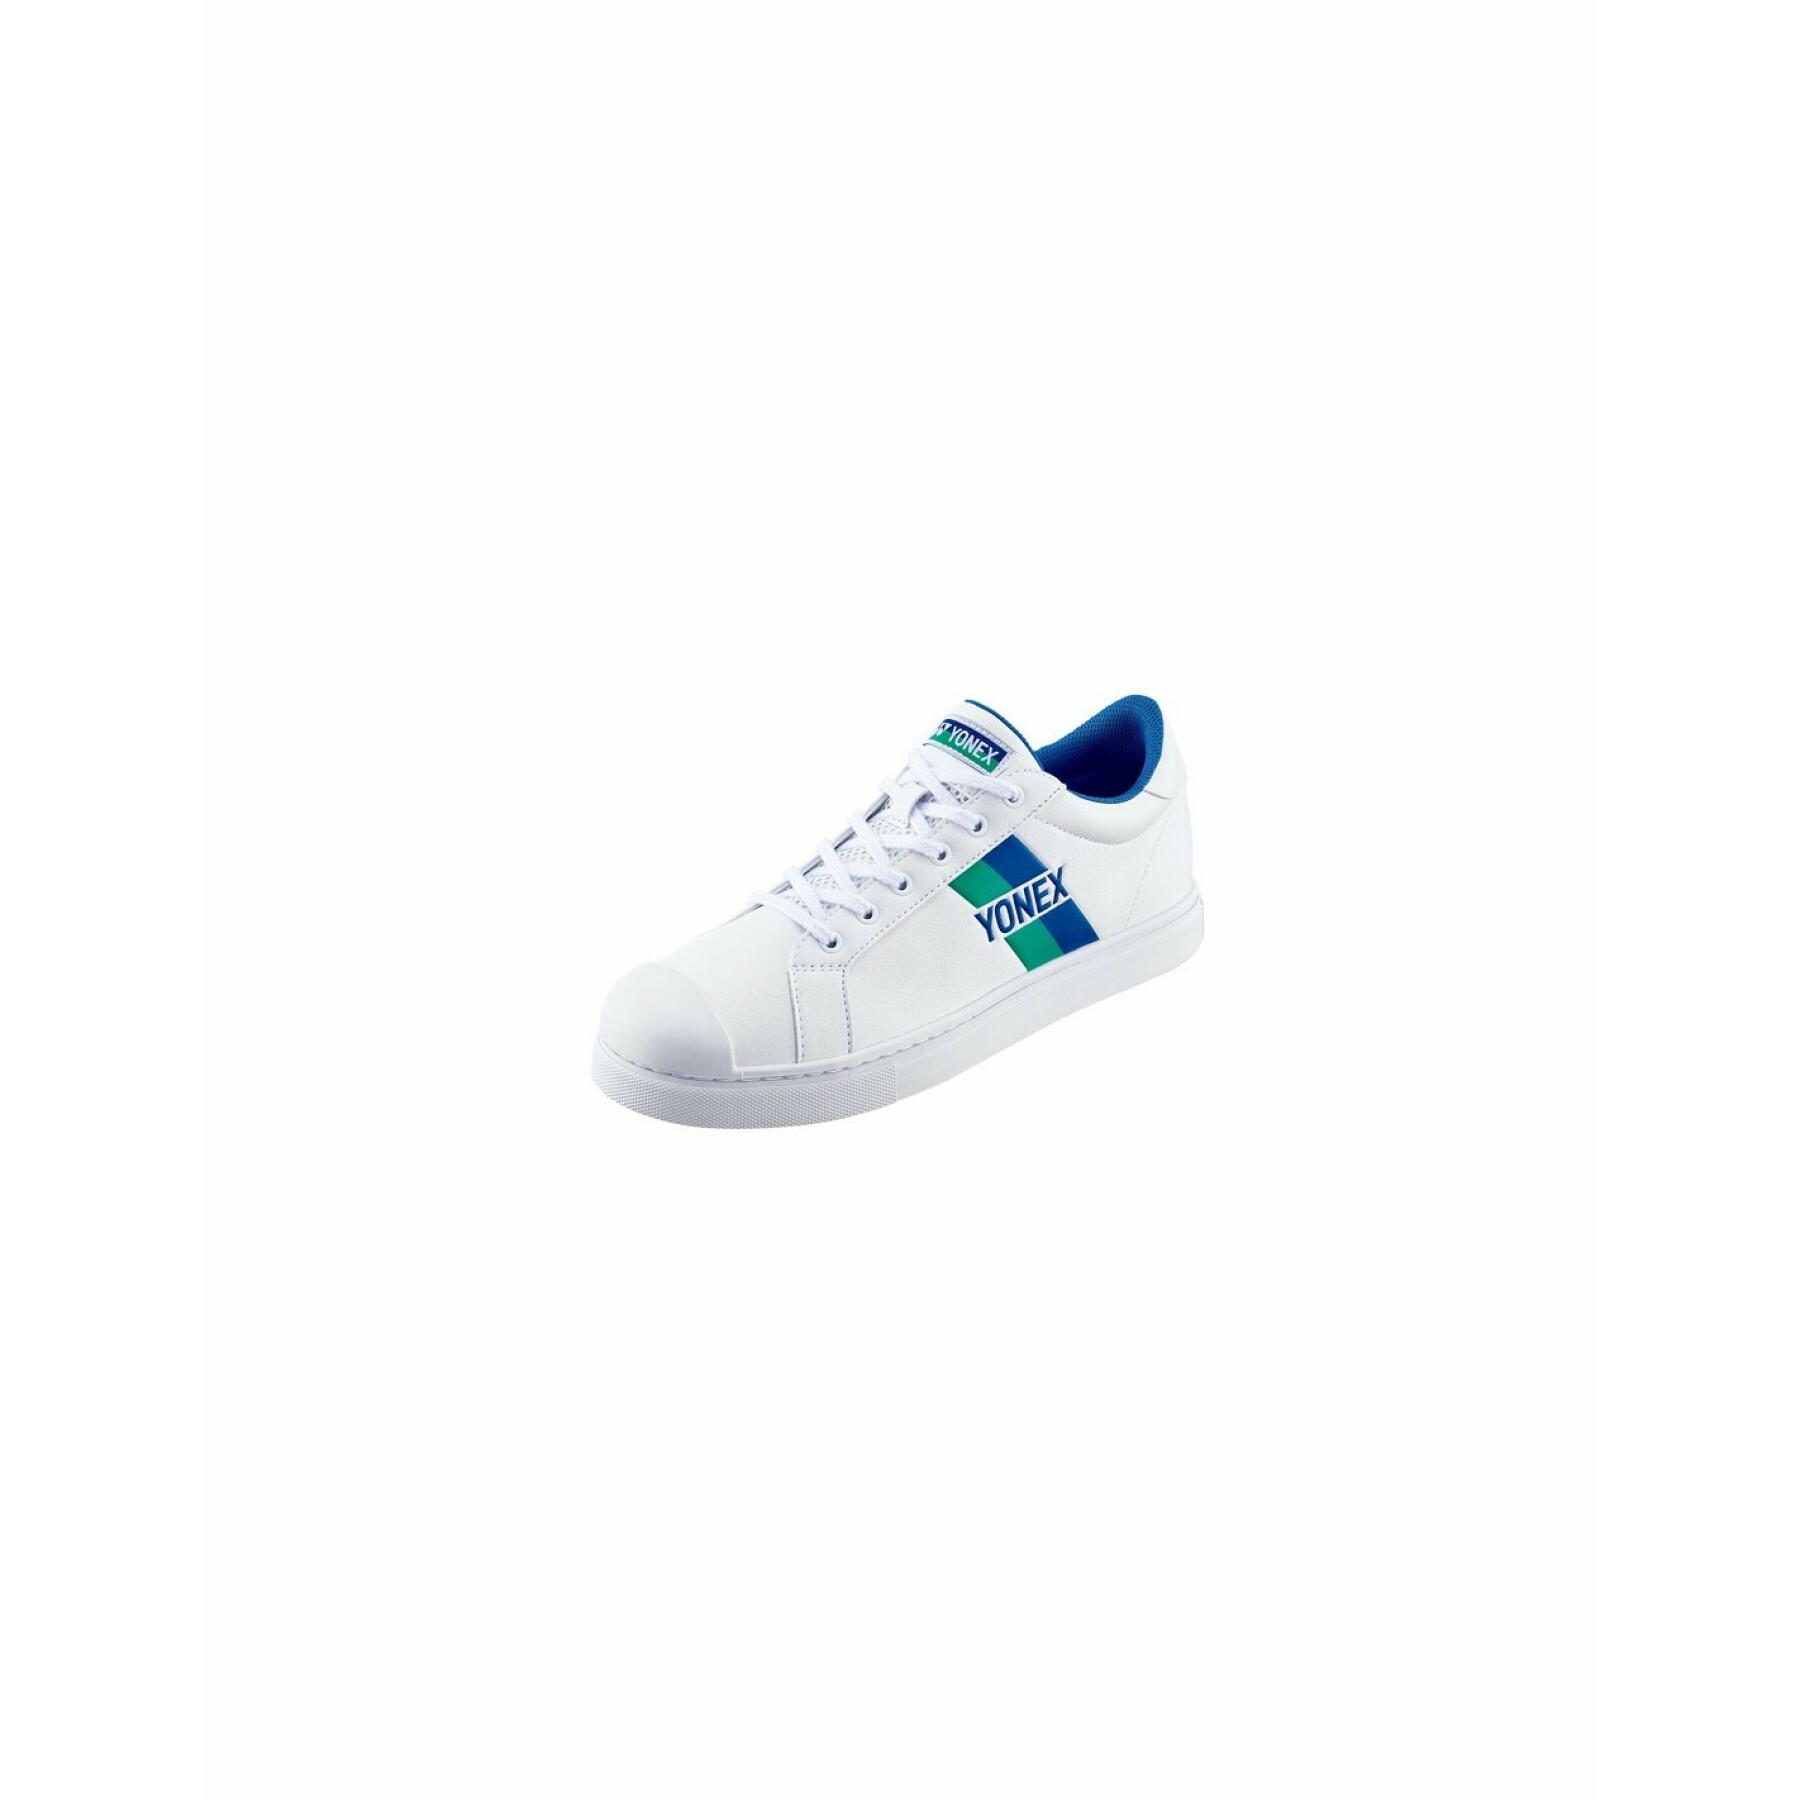 Indoor shoes Yonex 75th pc off